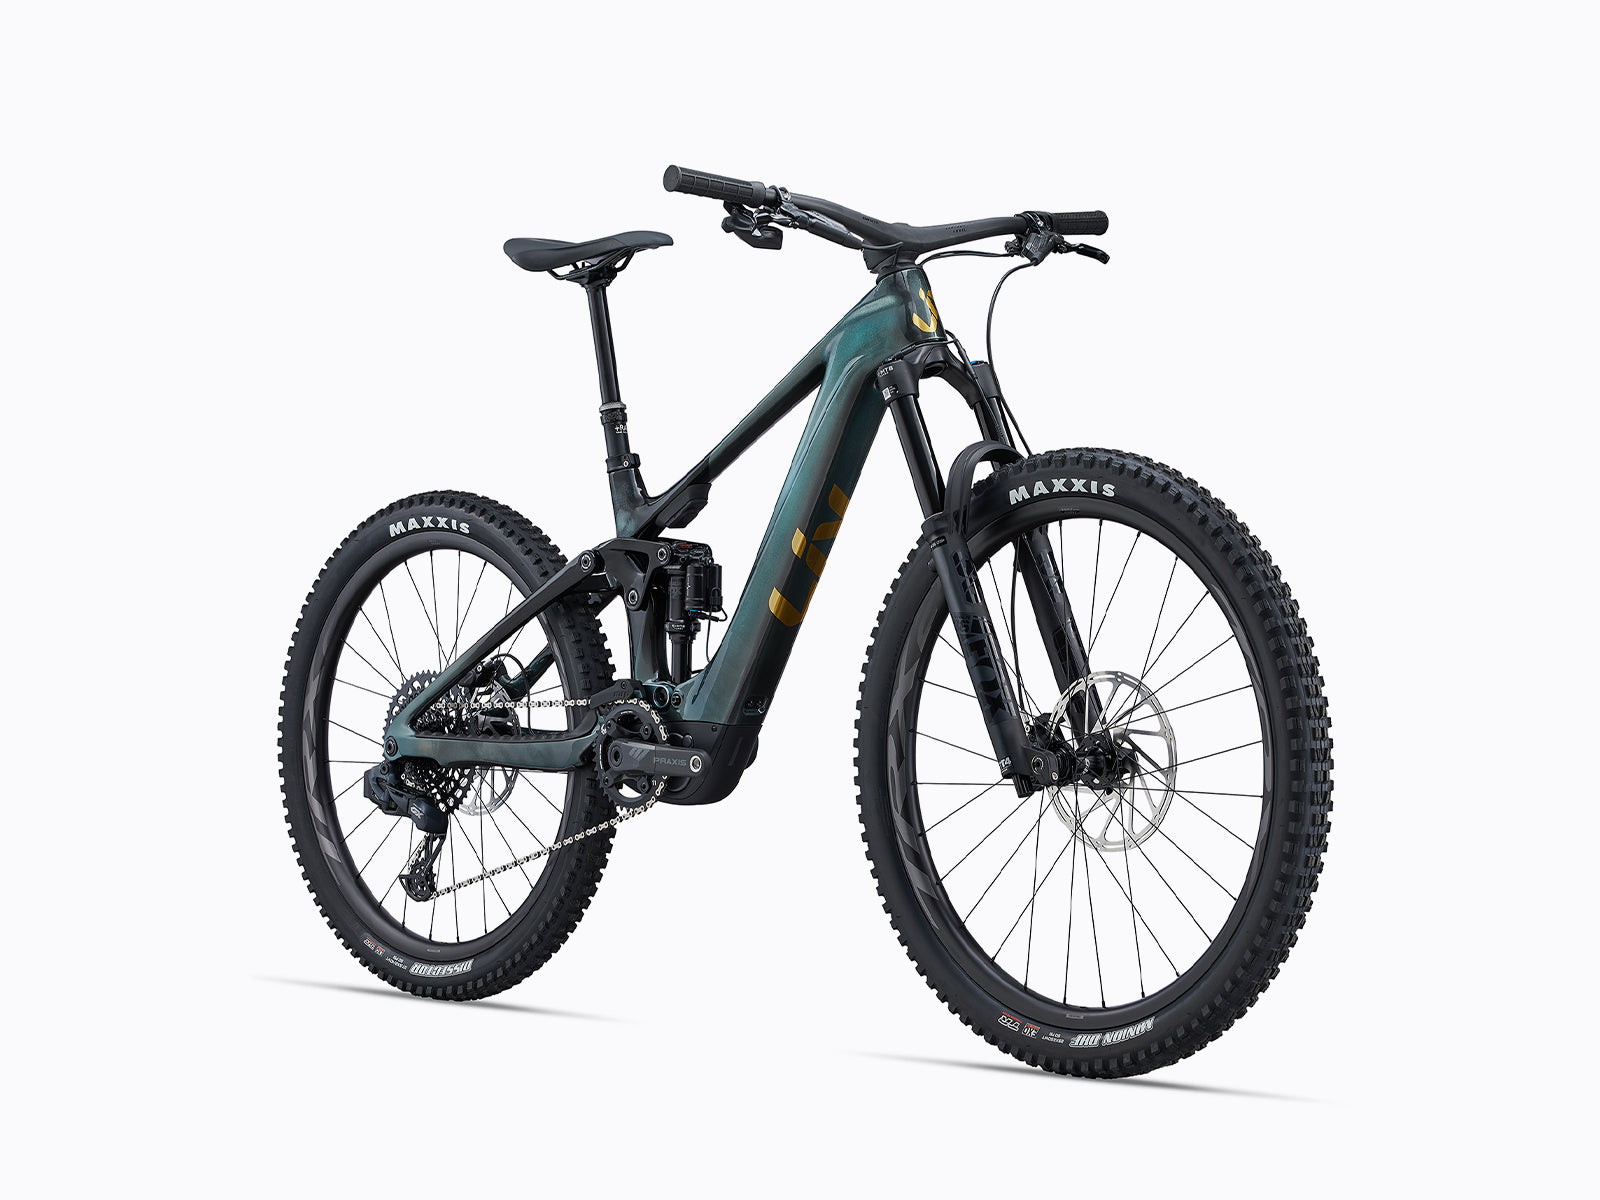 image includes intrigue x advanced e+ elite 1, a ladies mountain bike now sold at Giant Melbourne 